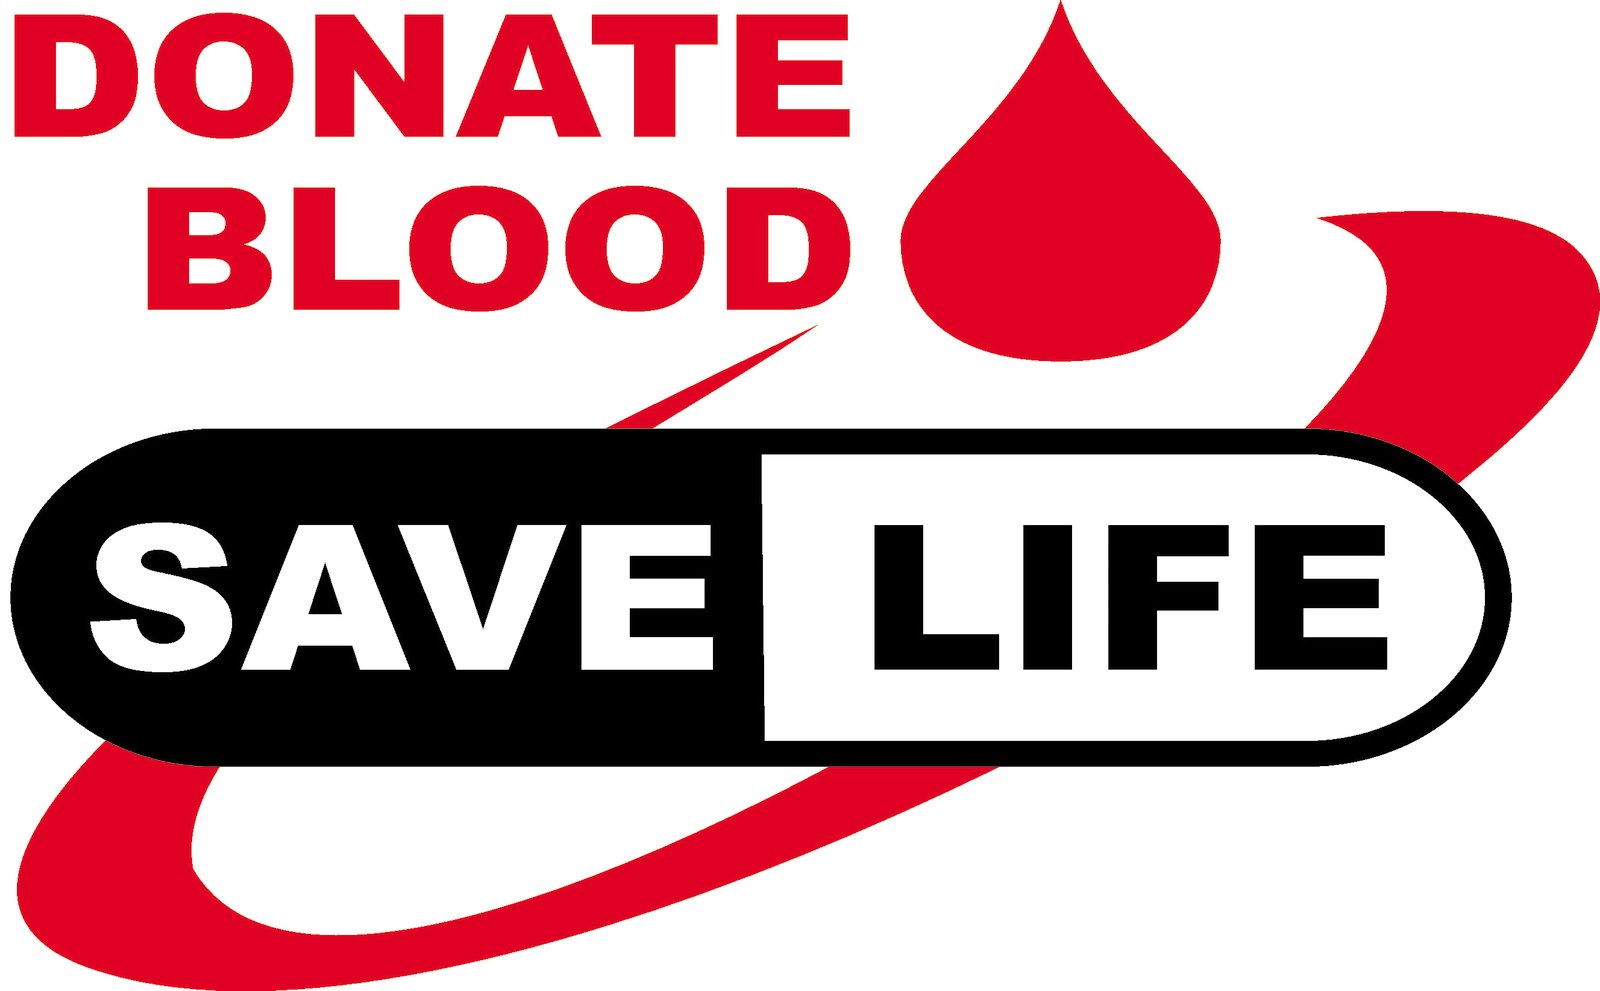 Blood clipart blood logo. Donation station 